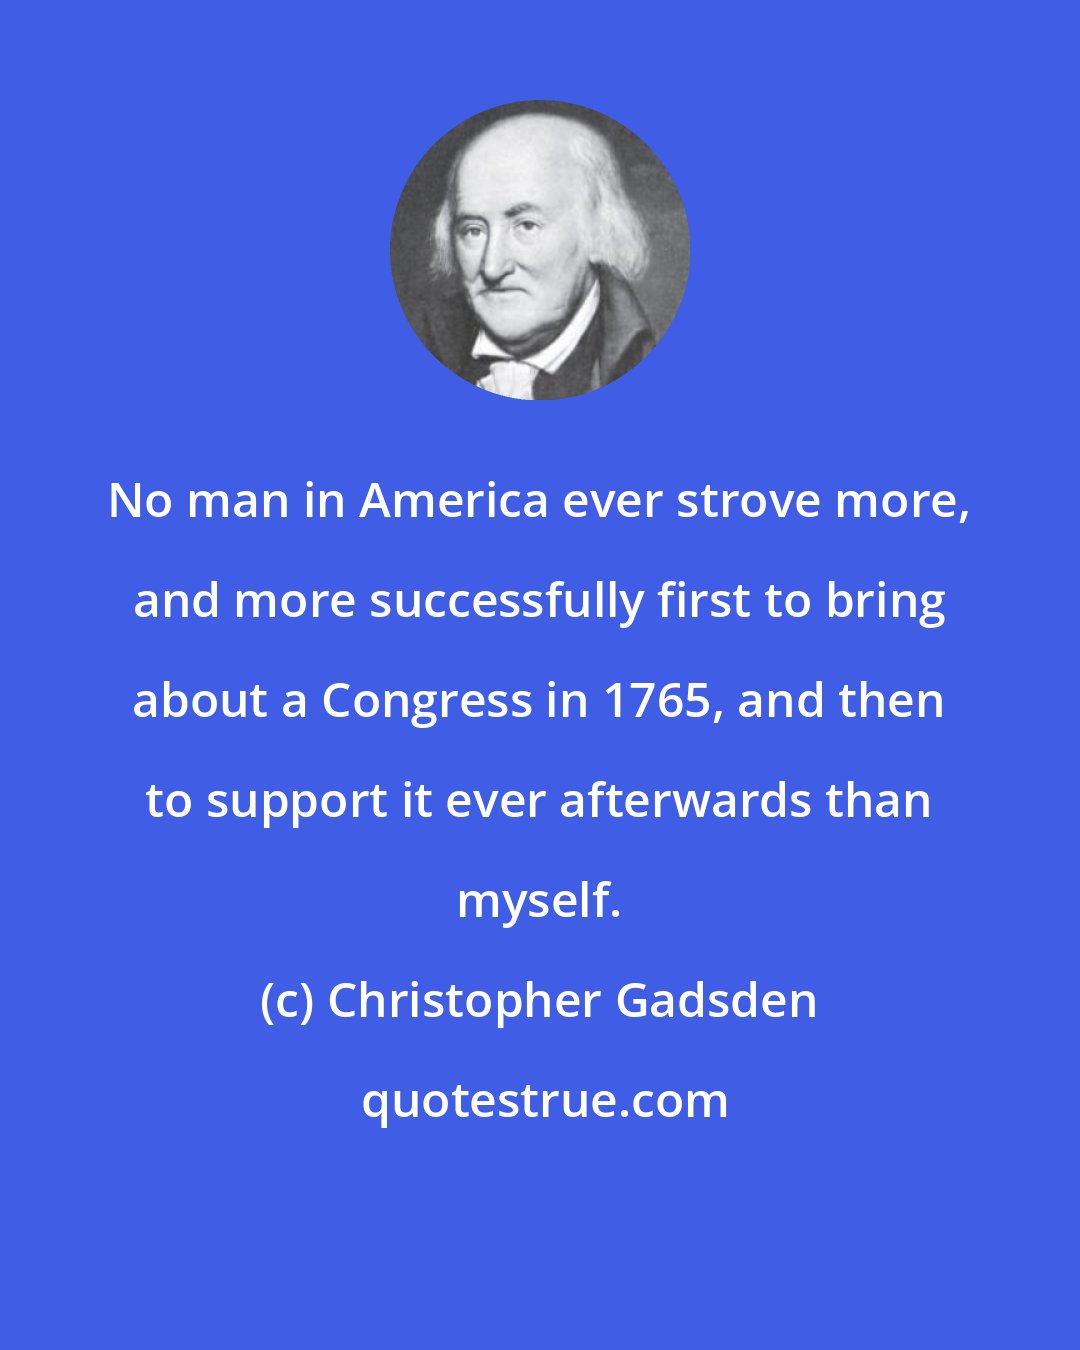 Christopher Gadsden: No man in America ever strove more, and more successfully first to bring about a Congress in 1765, and then to support it ever afterwards than myself.